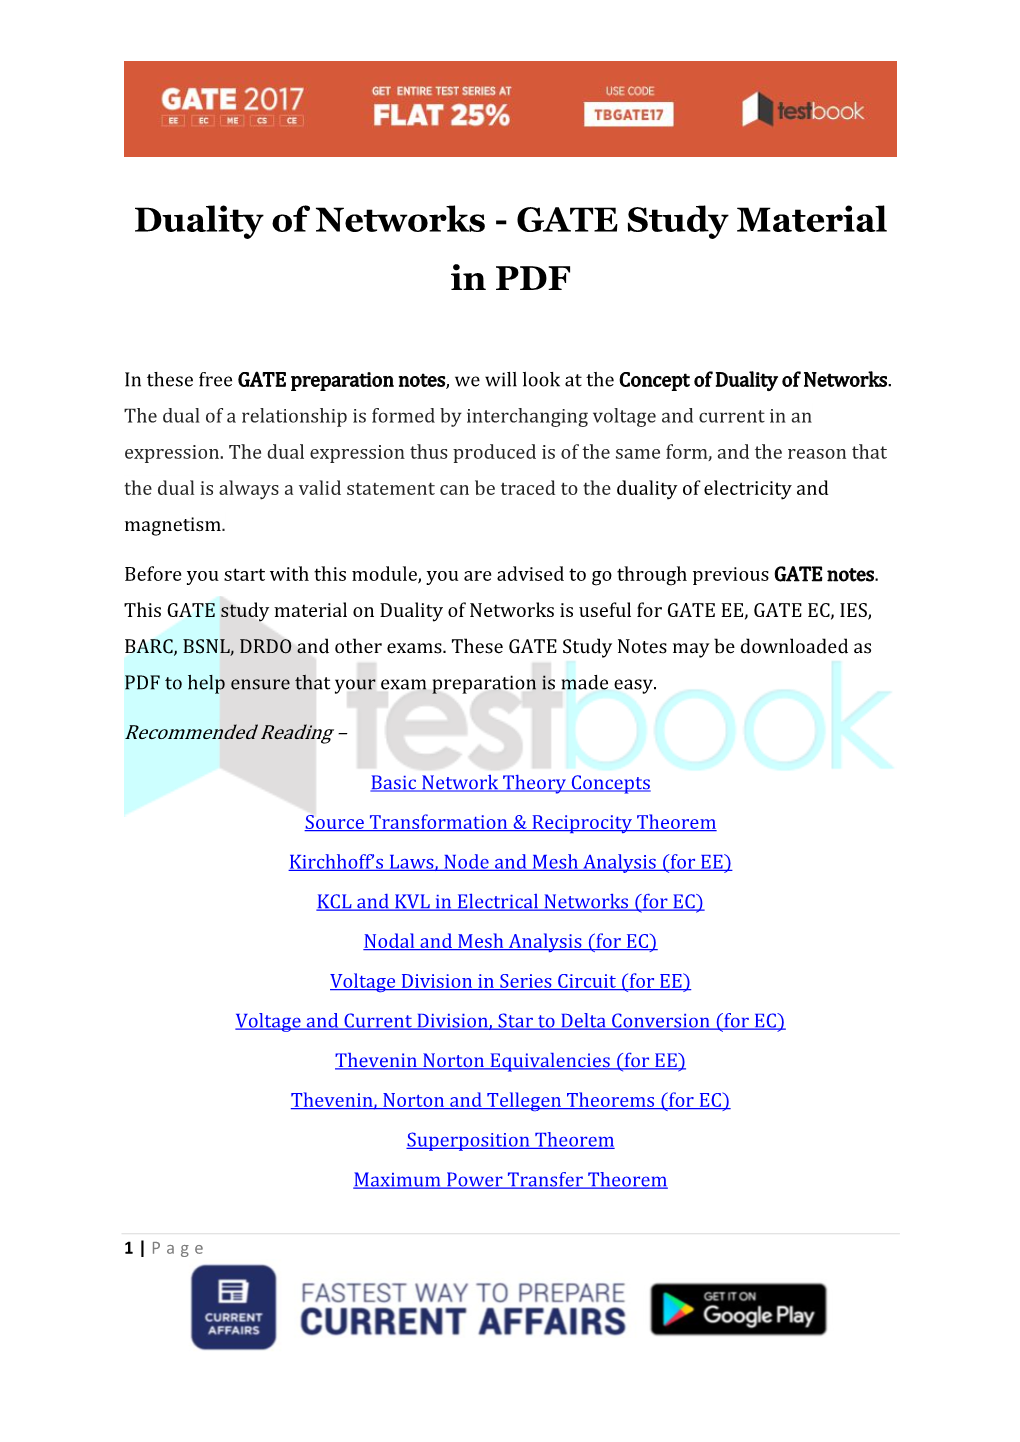 Duality of Networks - GATE Study Material in PDF